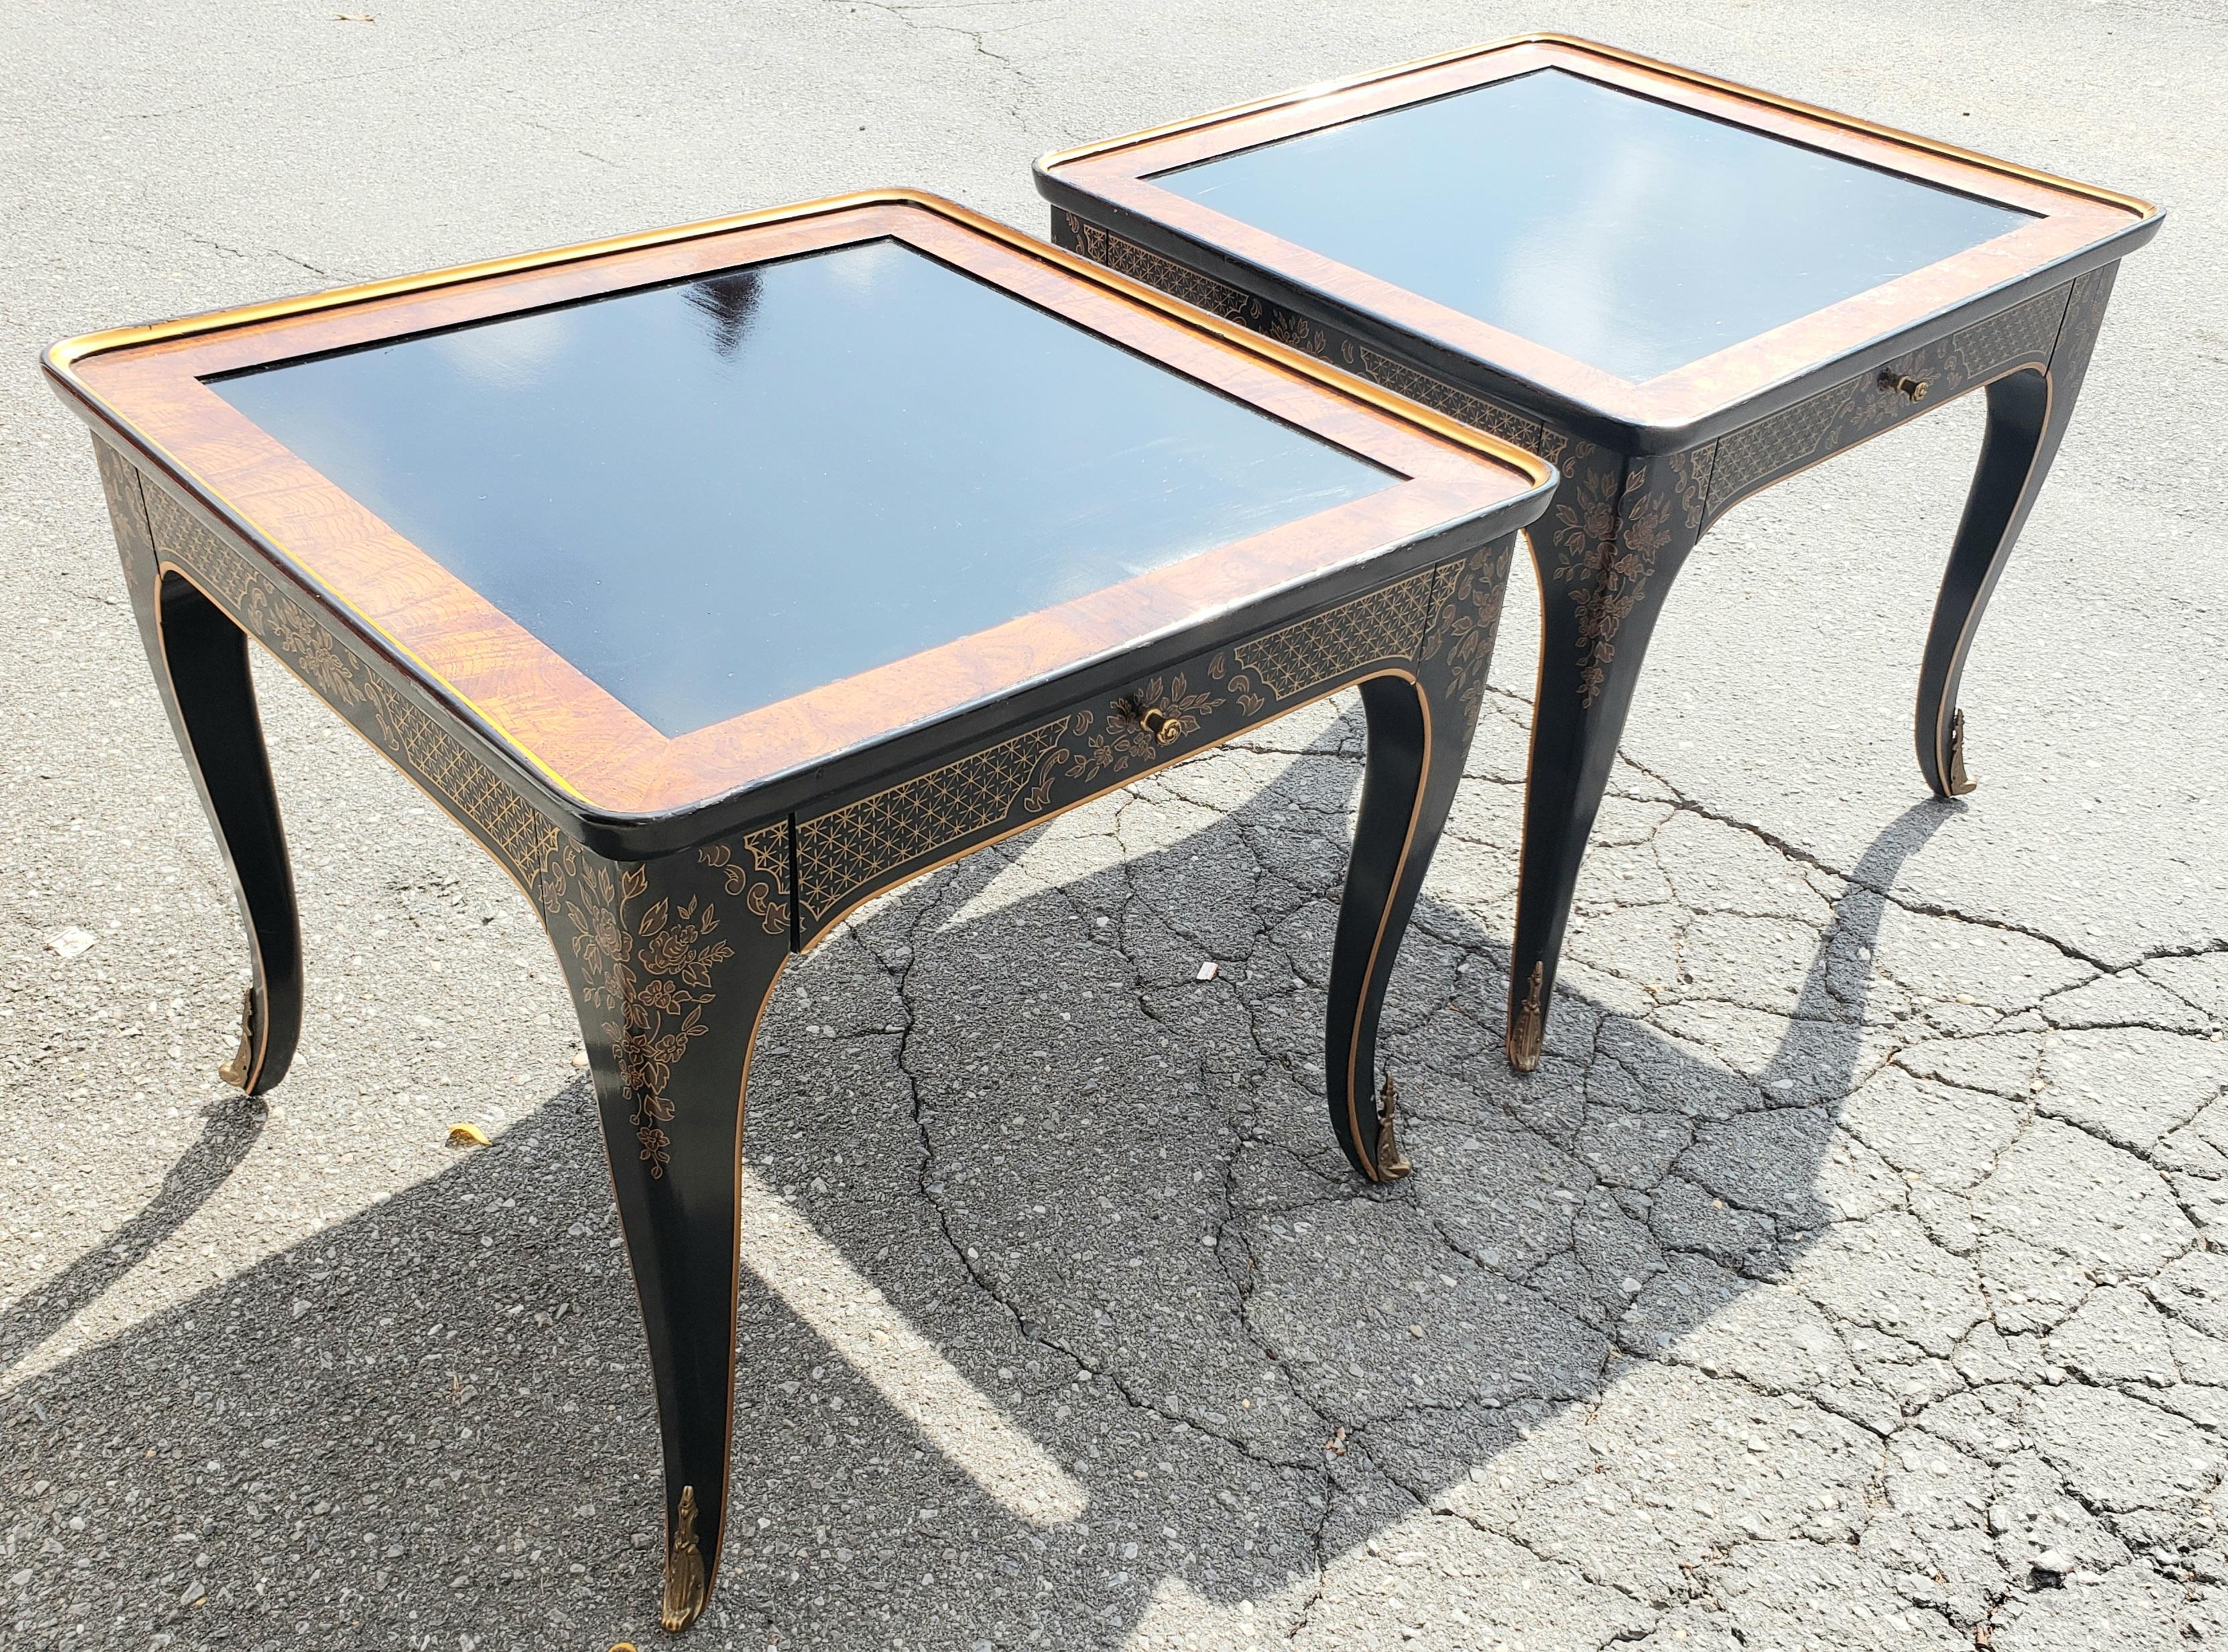 For your consideration is this Extraordinary pair of end tables!!! This is a gem by Drexel, from their ET Cetera line. It is comprised of two rectangular wood frames Tables with highly skilled, painted gold chinoiserie designs along the apron of the